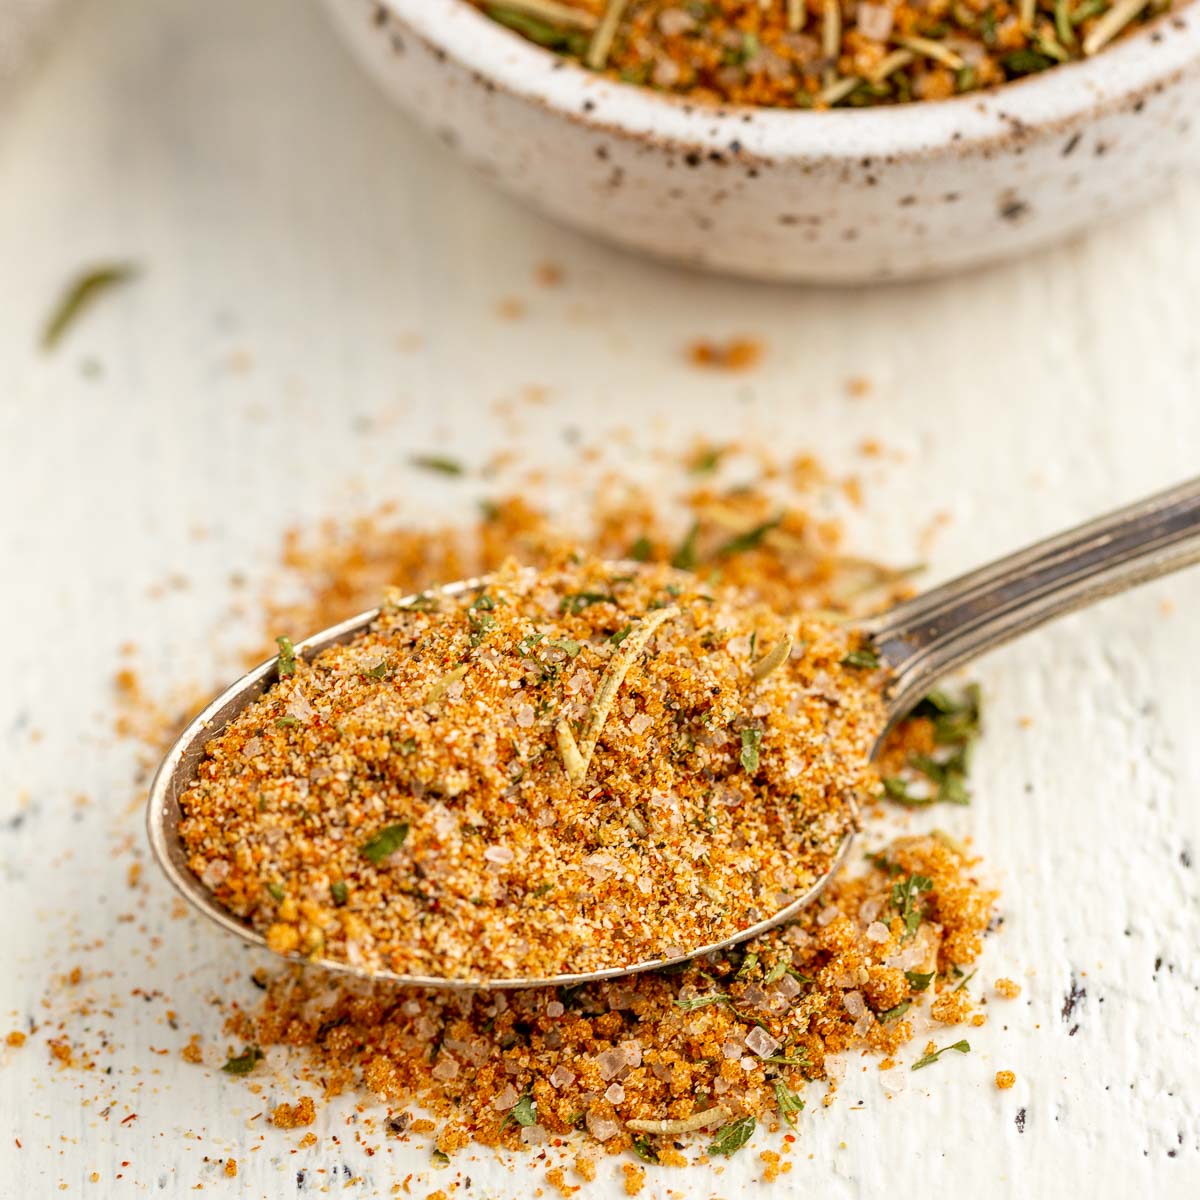 A spoon overflowing with with chicken rub.